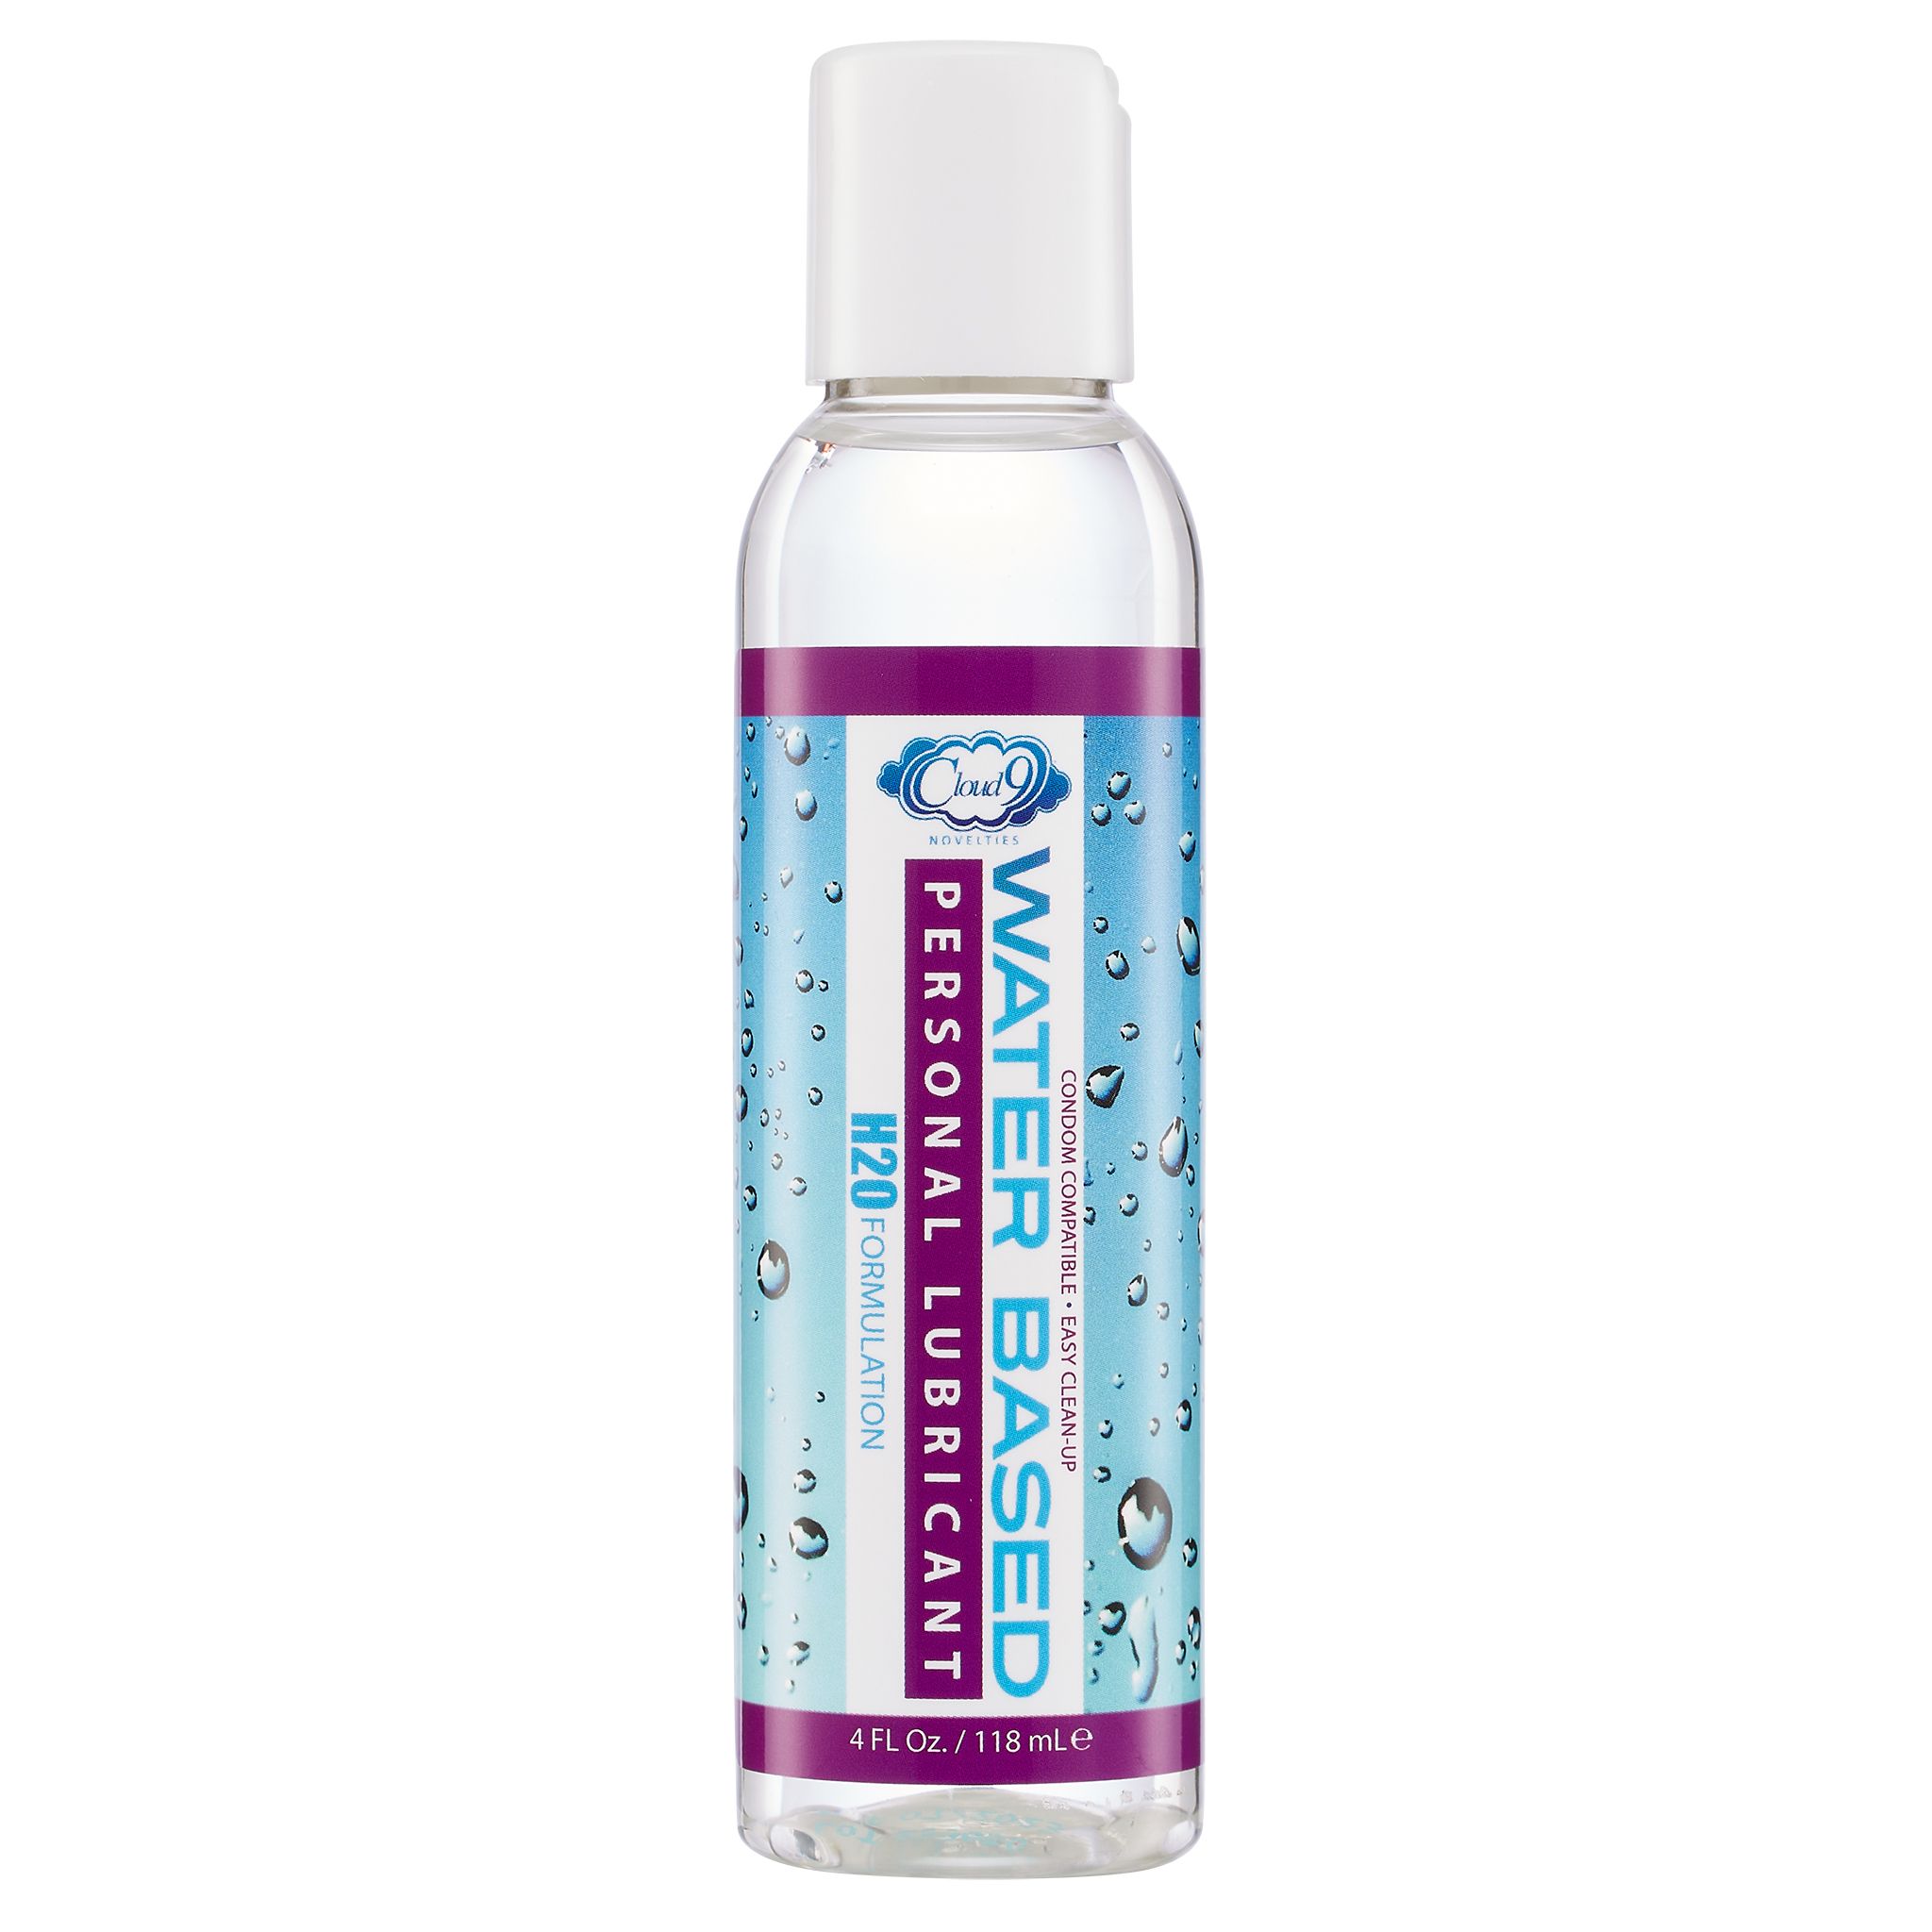 CLOUD 9 WATER BASED PERSONAL LUBRICANT 4 OZ